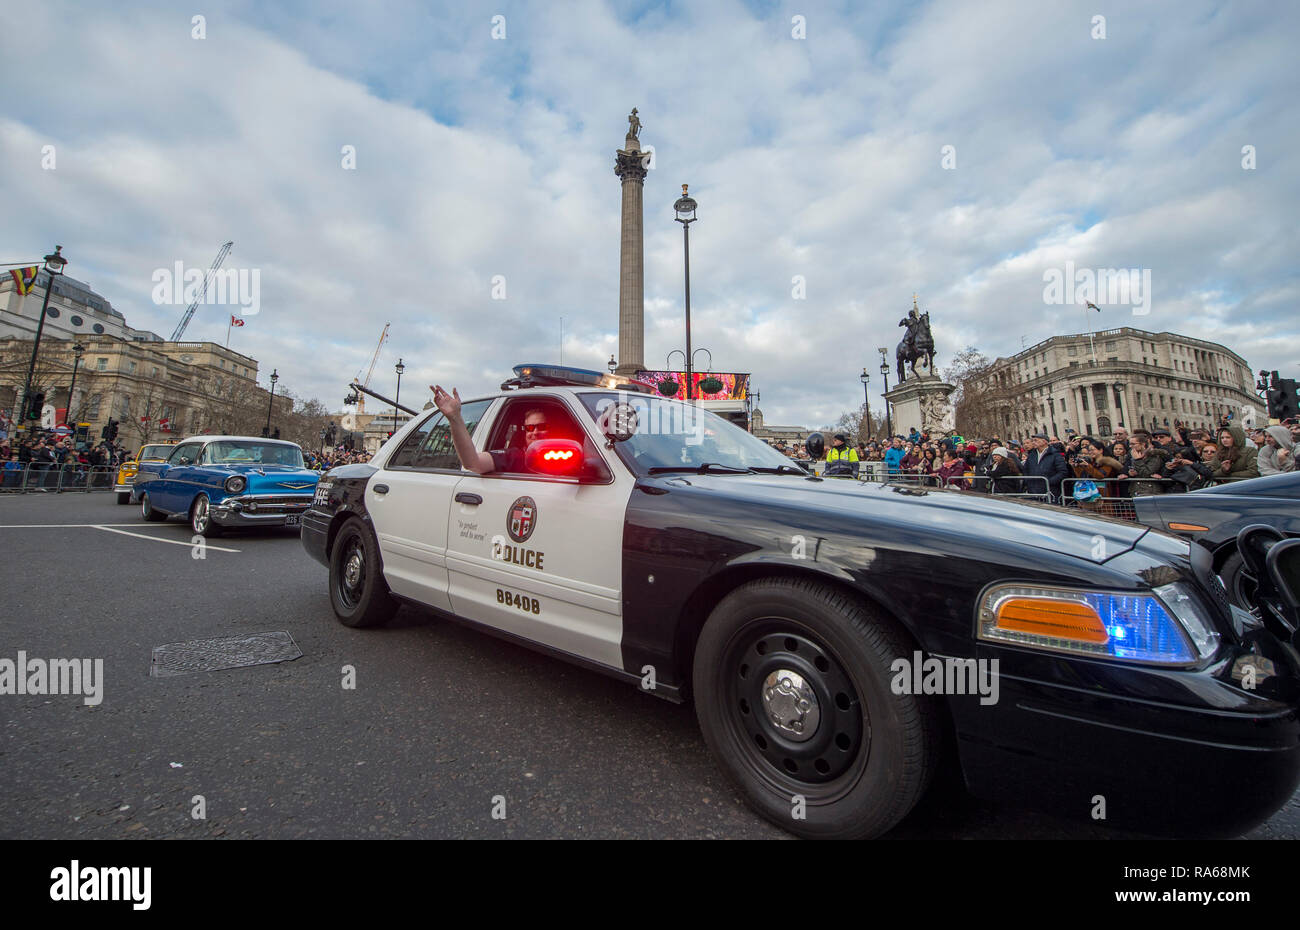 Westminster, London, UK. 1 January 2019. The annual London New Years Day Parade takes place on a route from Piccadilly to Parliament Square, watched by thousands. This years theme is London Welcomes The World. Image: American Cop and Classic Cars UK. Credit: Malcolm Park/Alamy Live News. Stock Photo